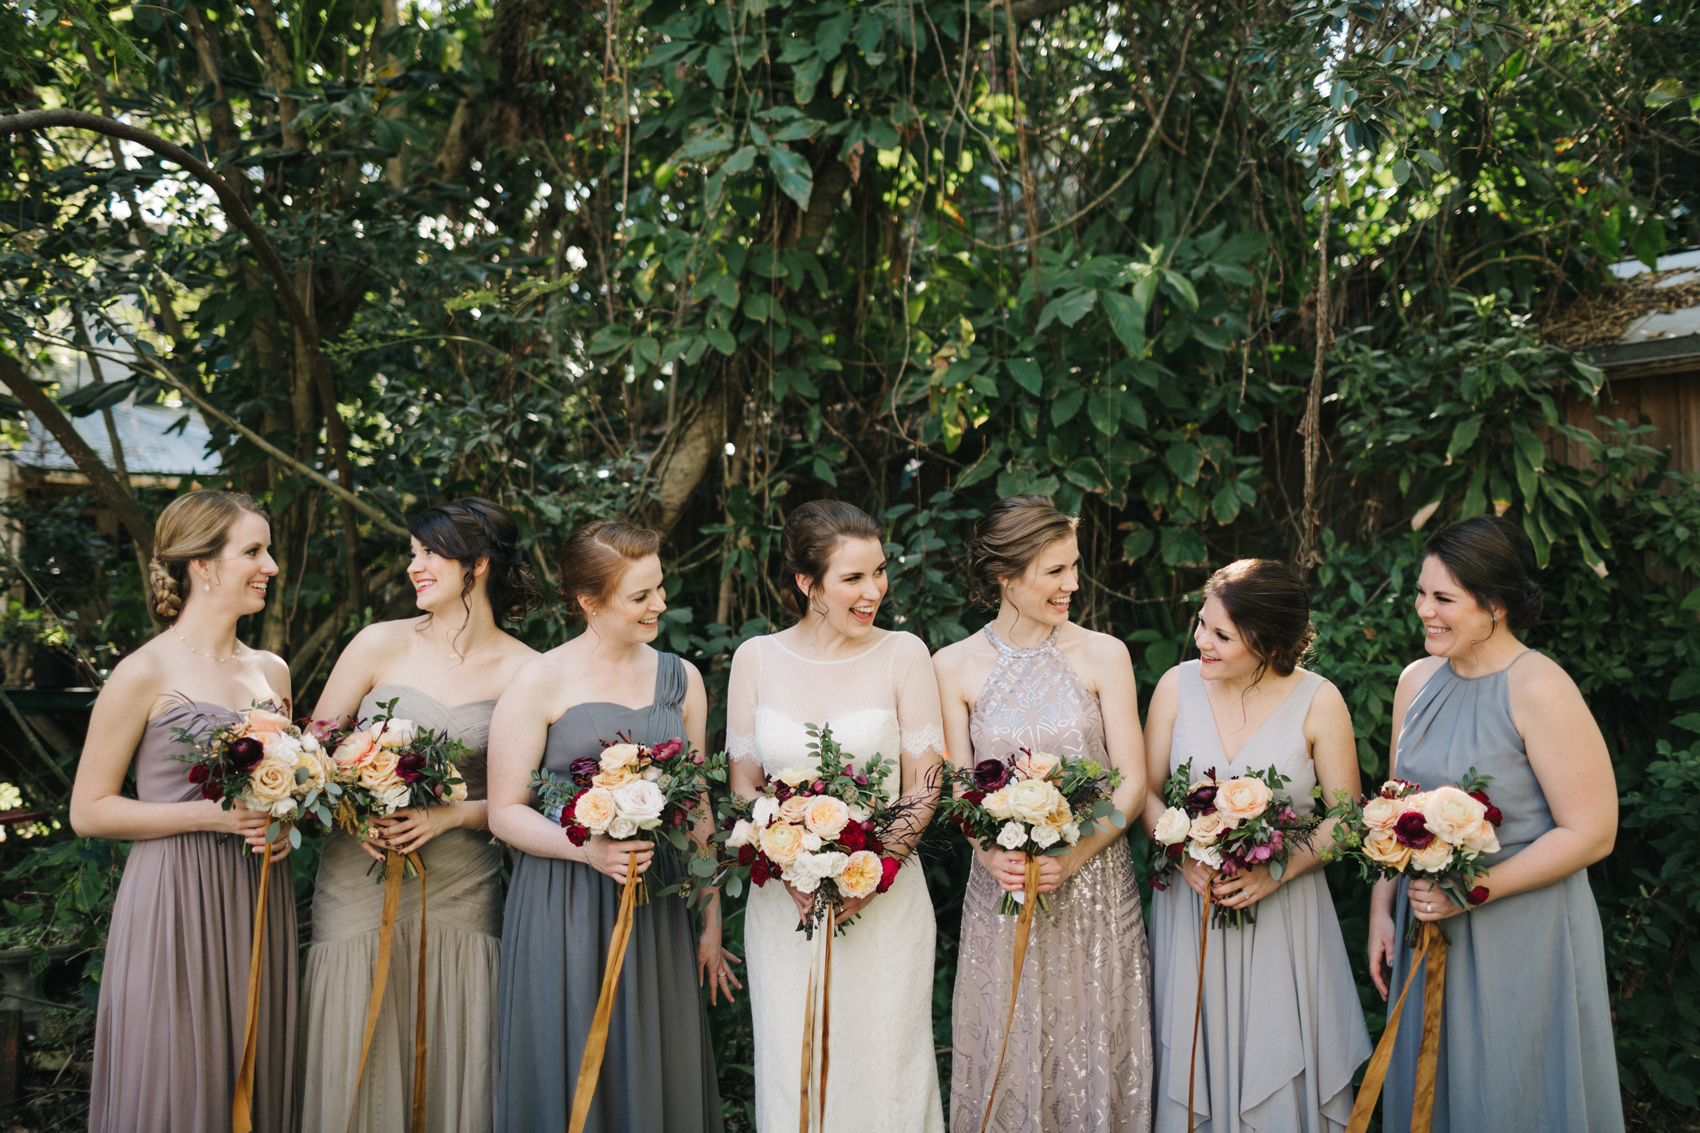 candid photo of the bride laughing with her bridesmaids in the garden before the ceremony at Waldo's Secret Garden